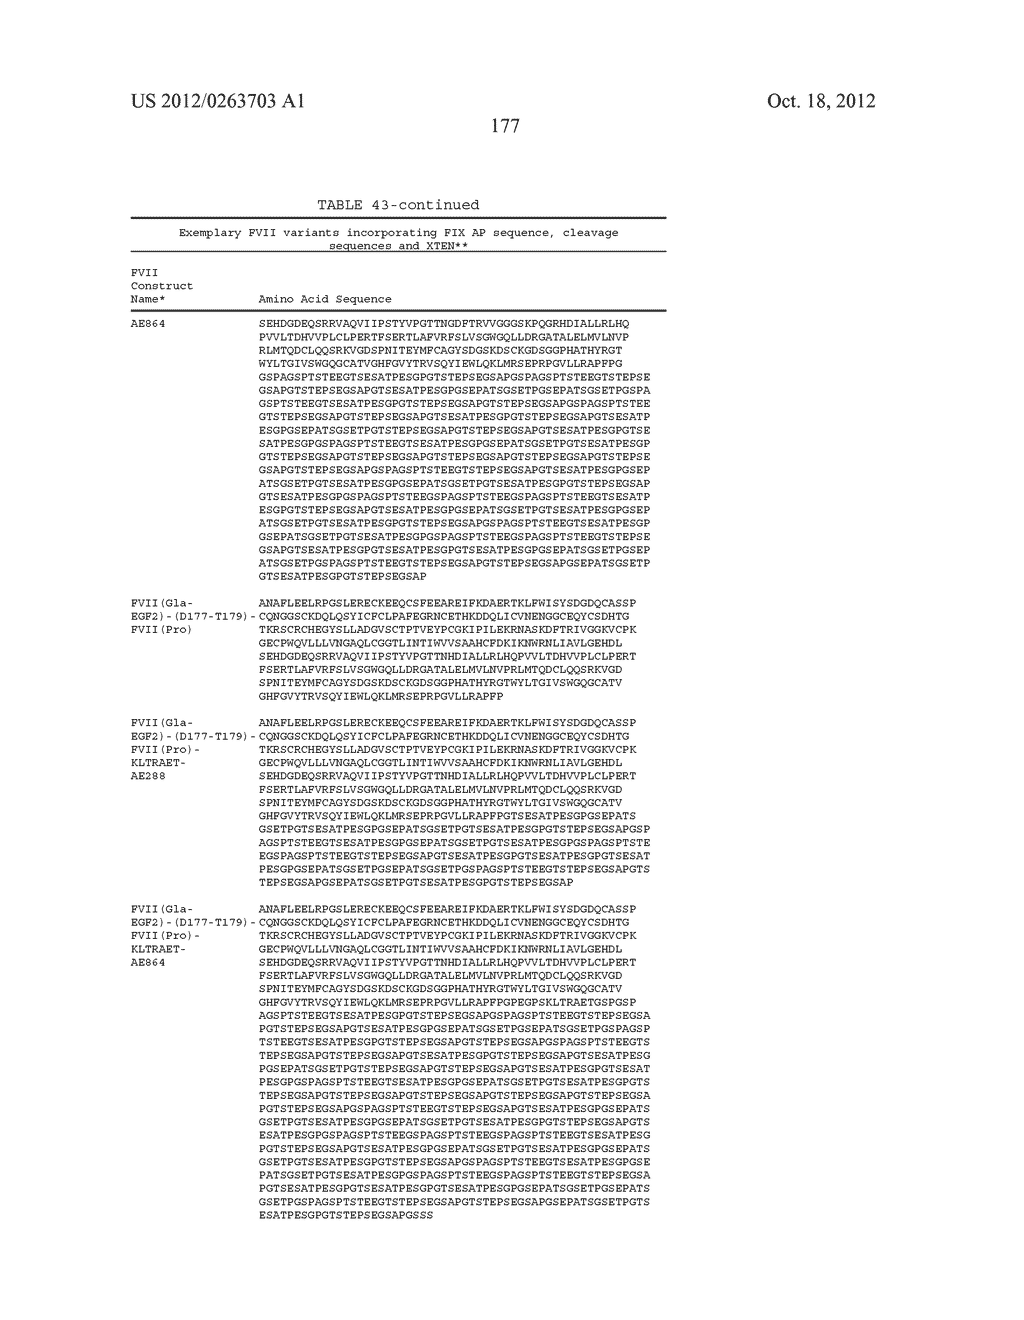 COAGULATION FACTOR IX COMPOSITIONS AND METHODS OF MAKING AND USING SAME - diagram, schematic, and image 214